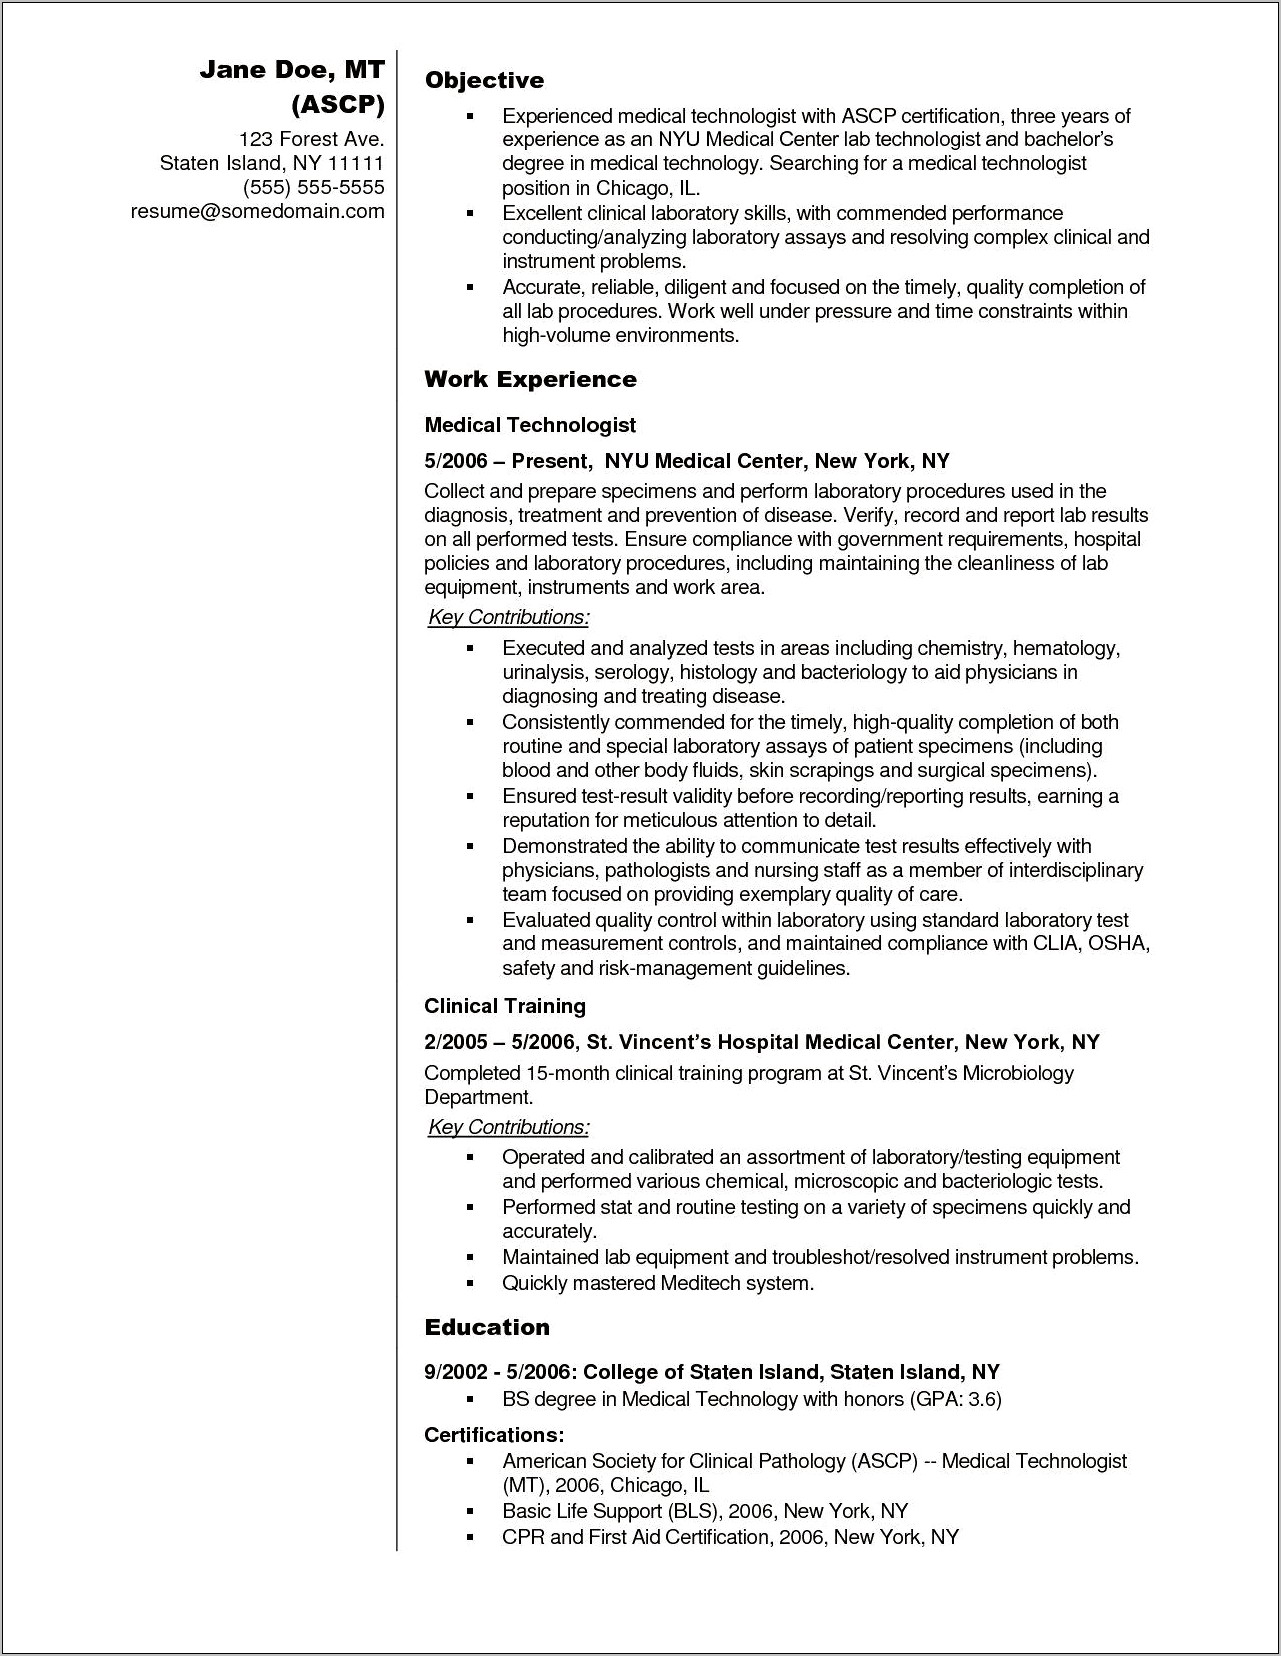 Resume Work Experience For Medical Technologist